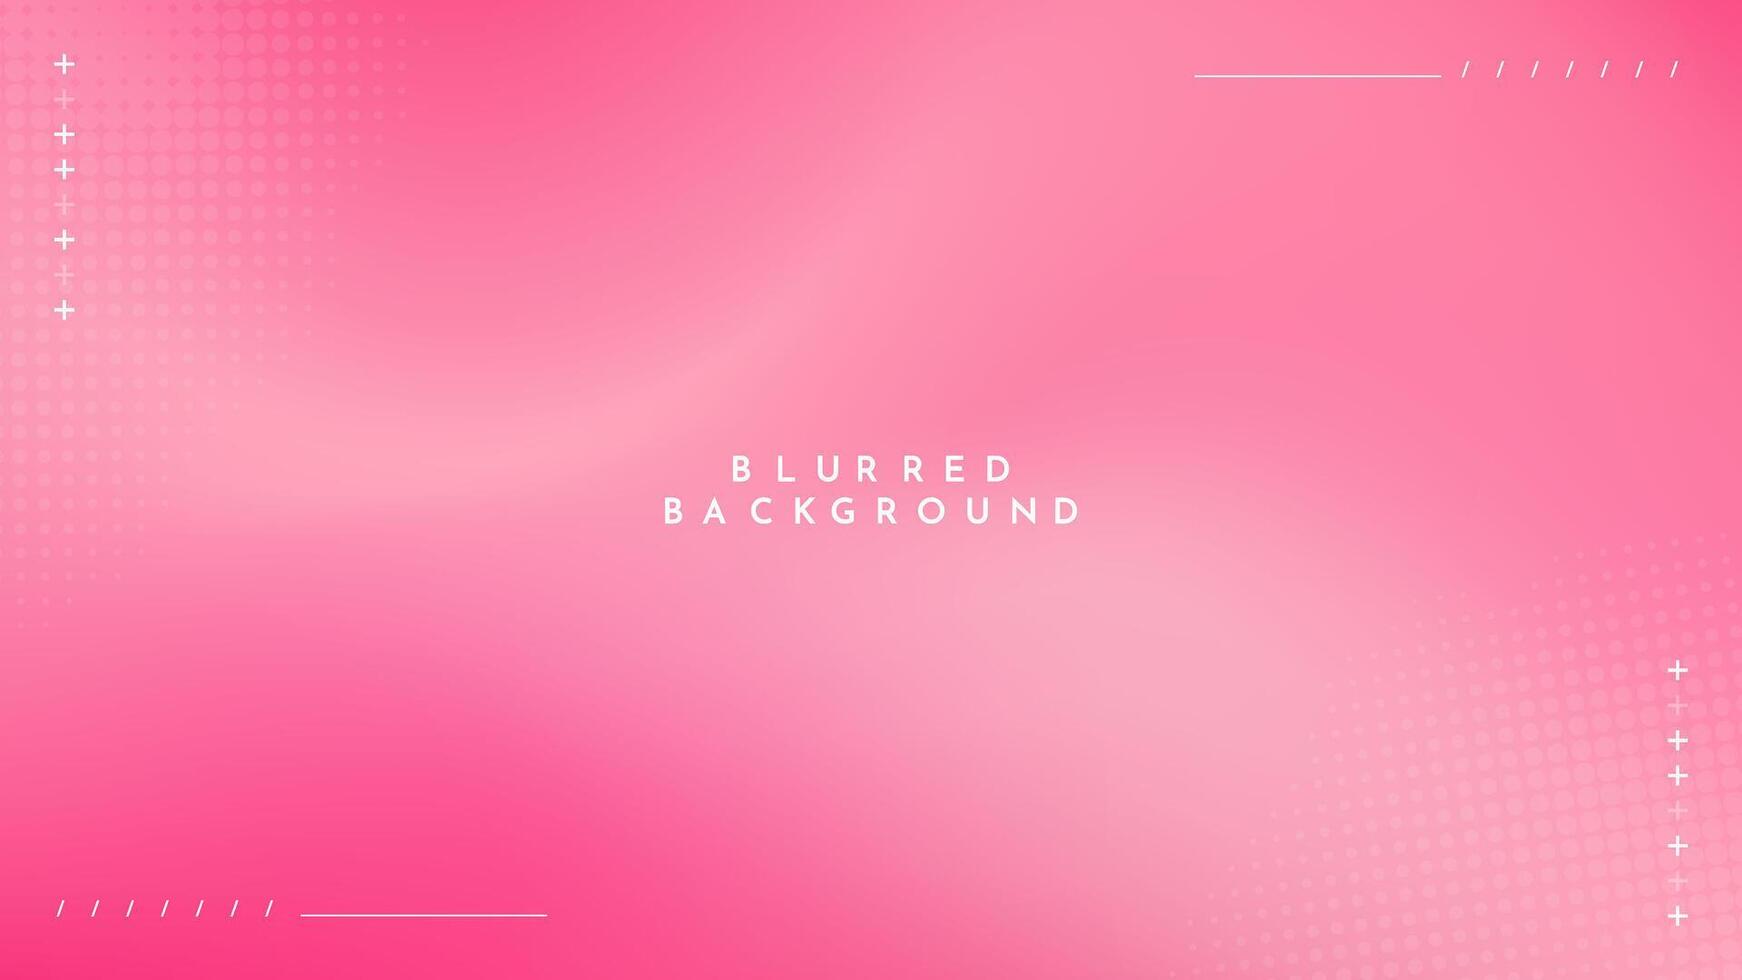 Abstract Background pink white color with Blurred Image is a  visually appealing design asset for use in advertisements, websites, or social media posts to add a modern touch to the visuals. vector